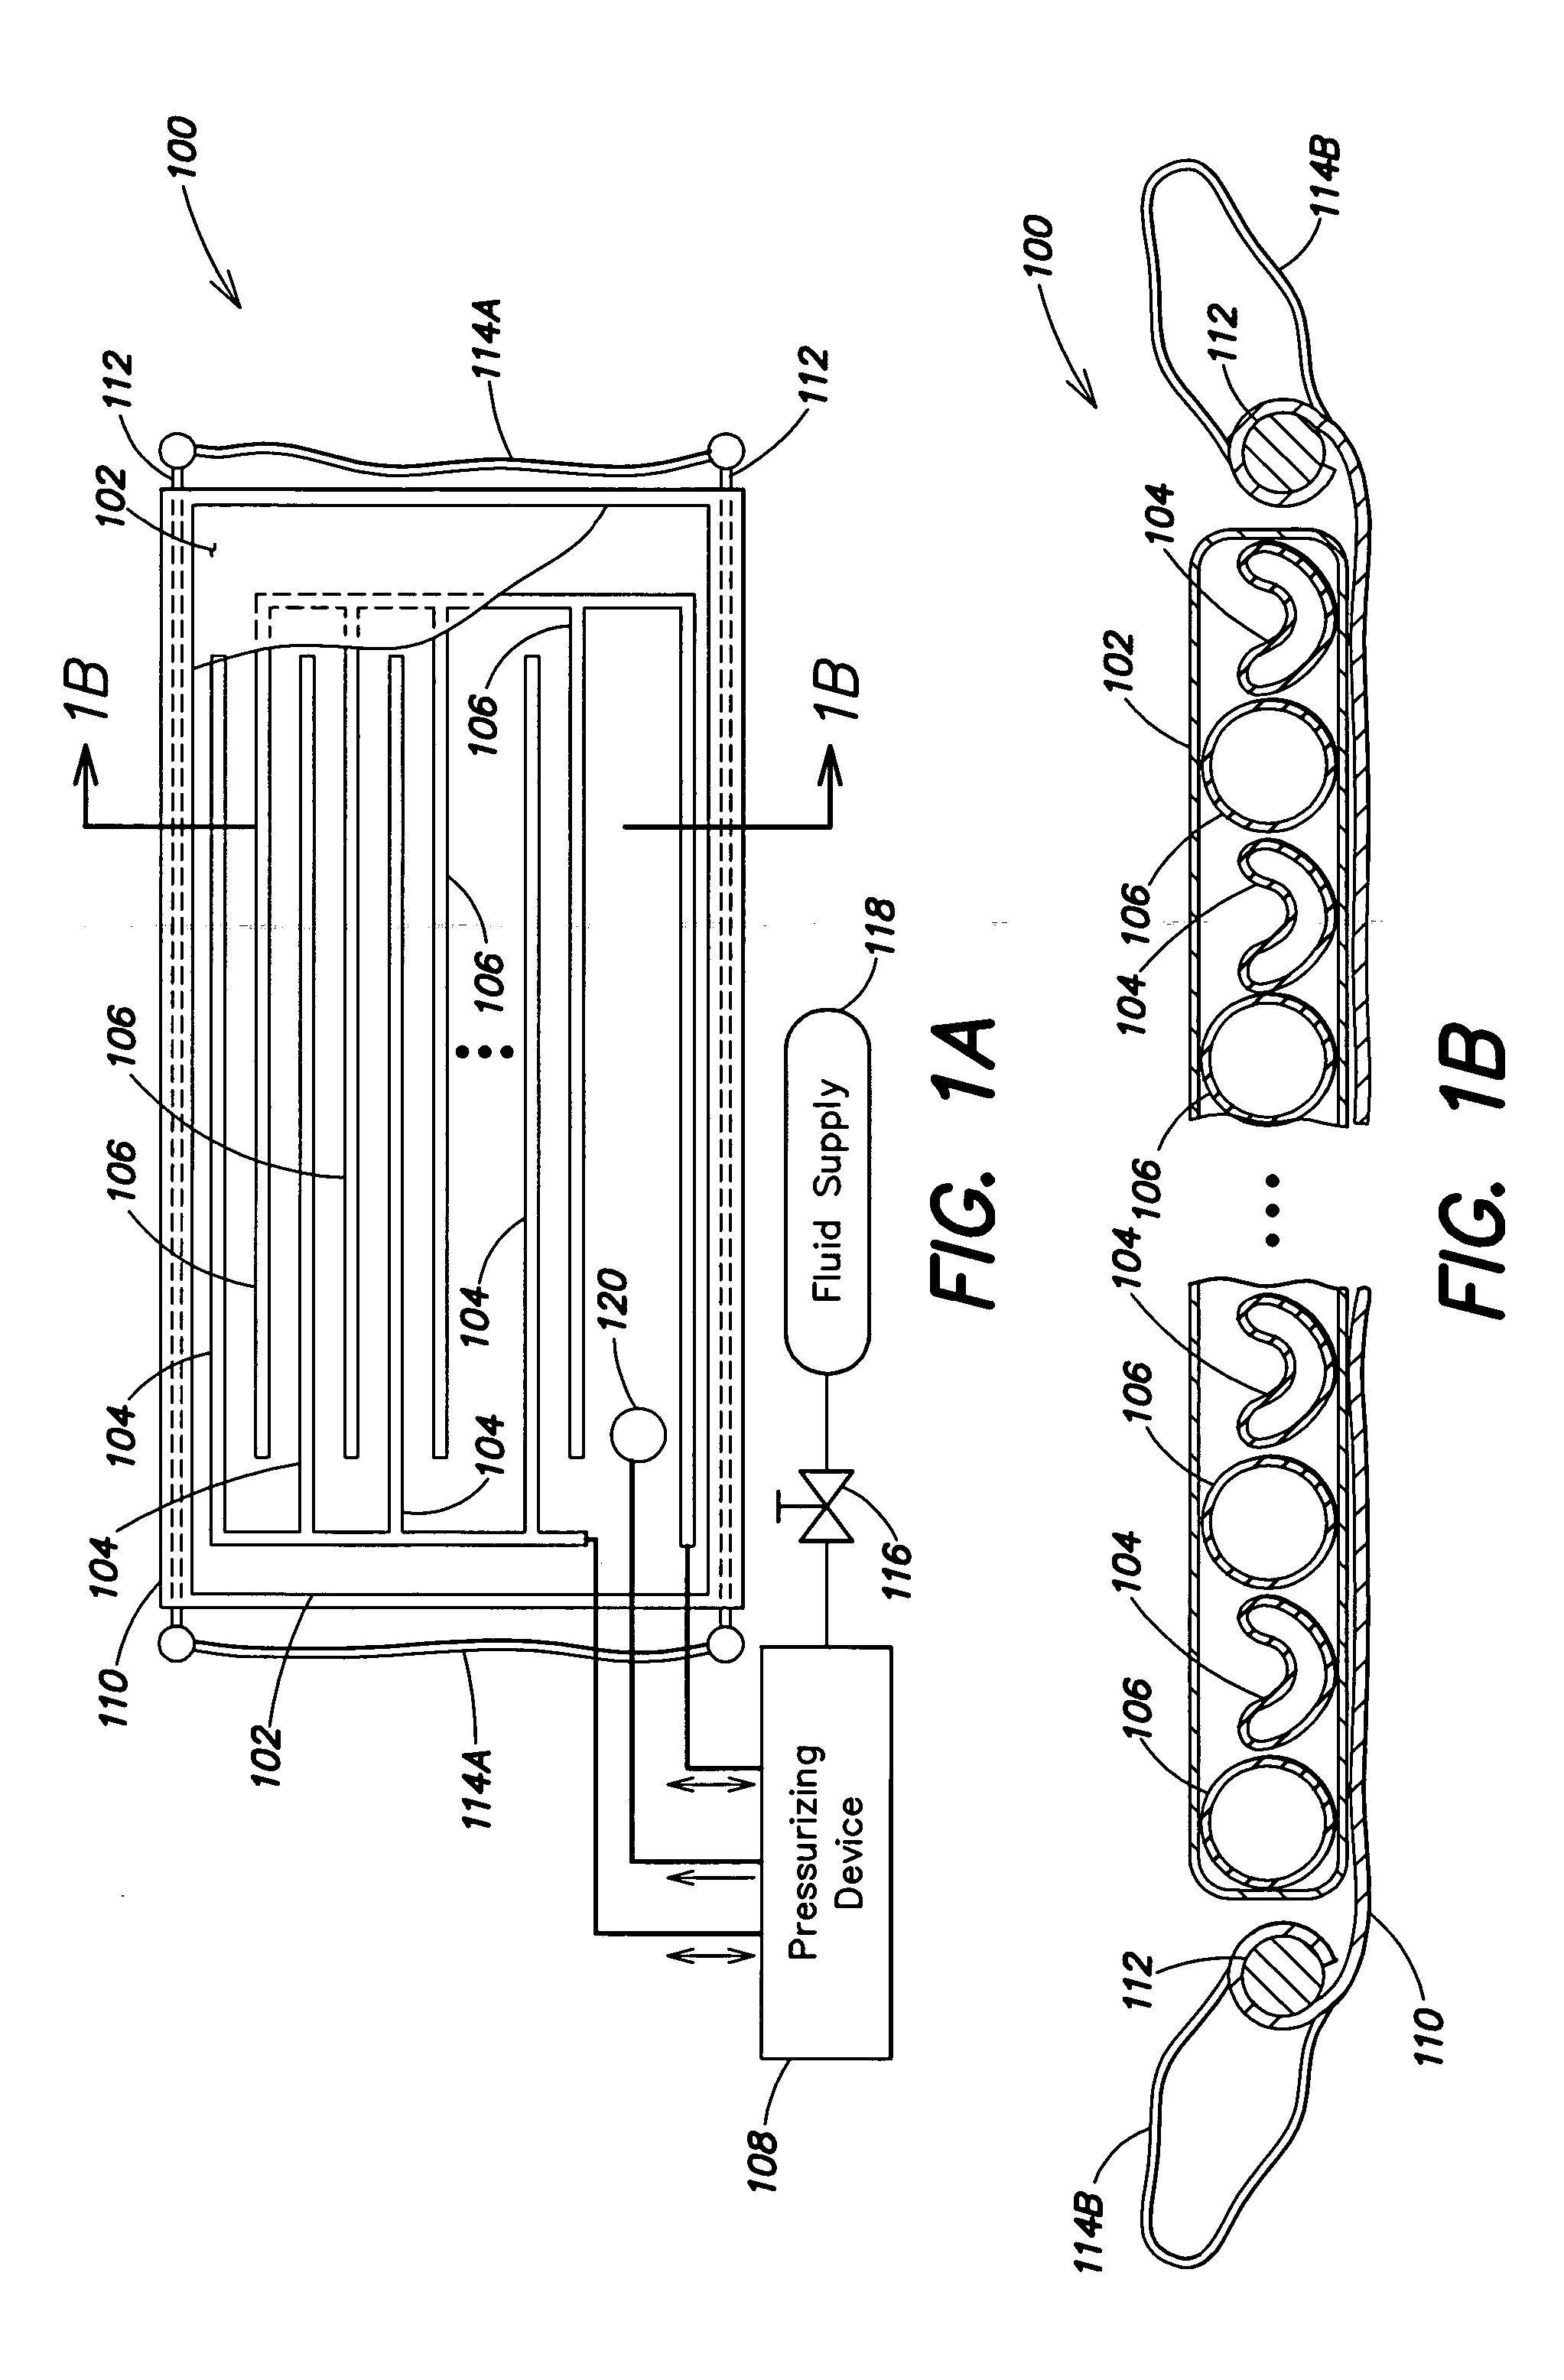 Apparatus and methods for preventing pressure ulcers in bedfast patients